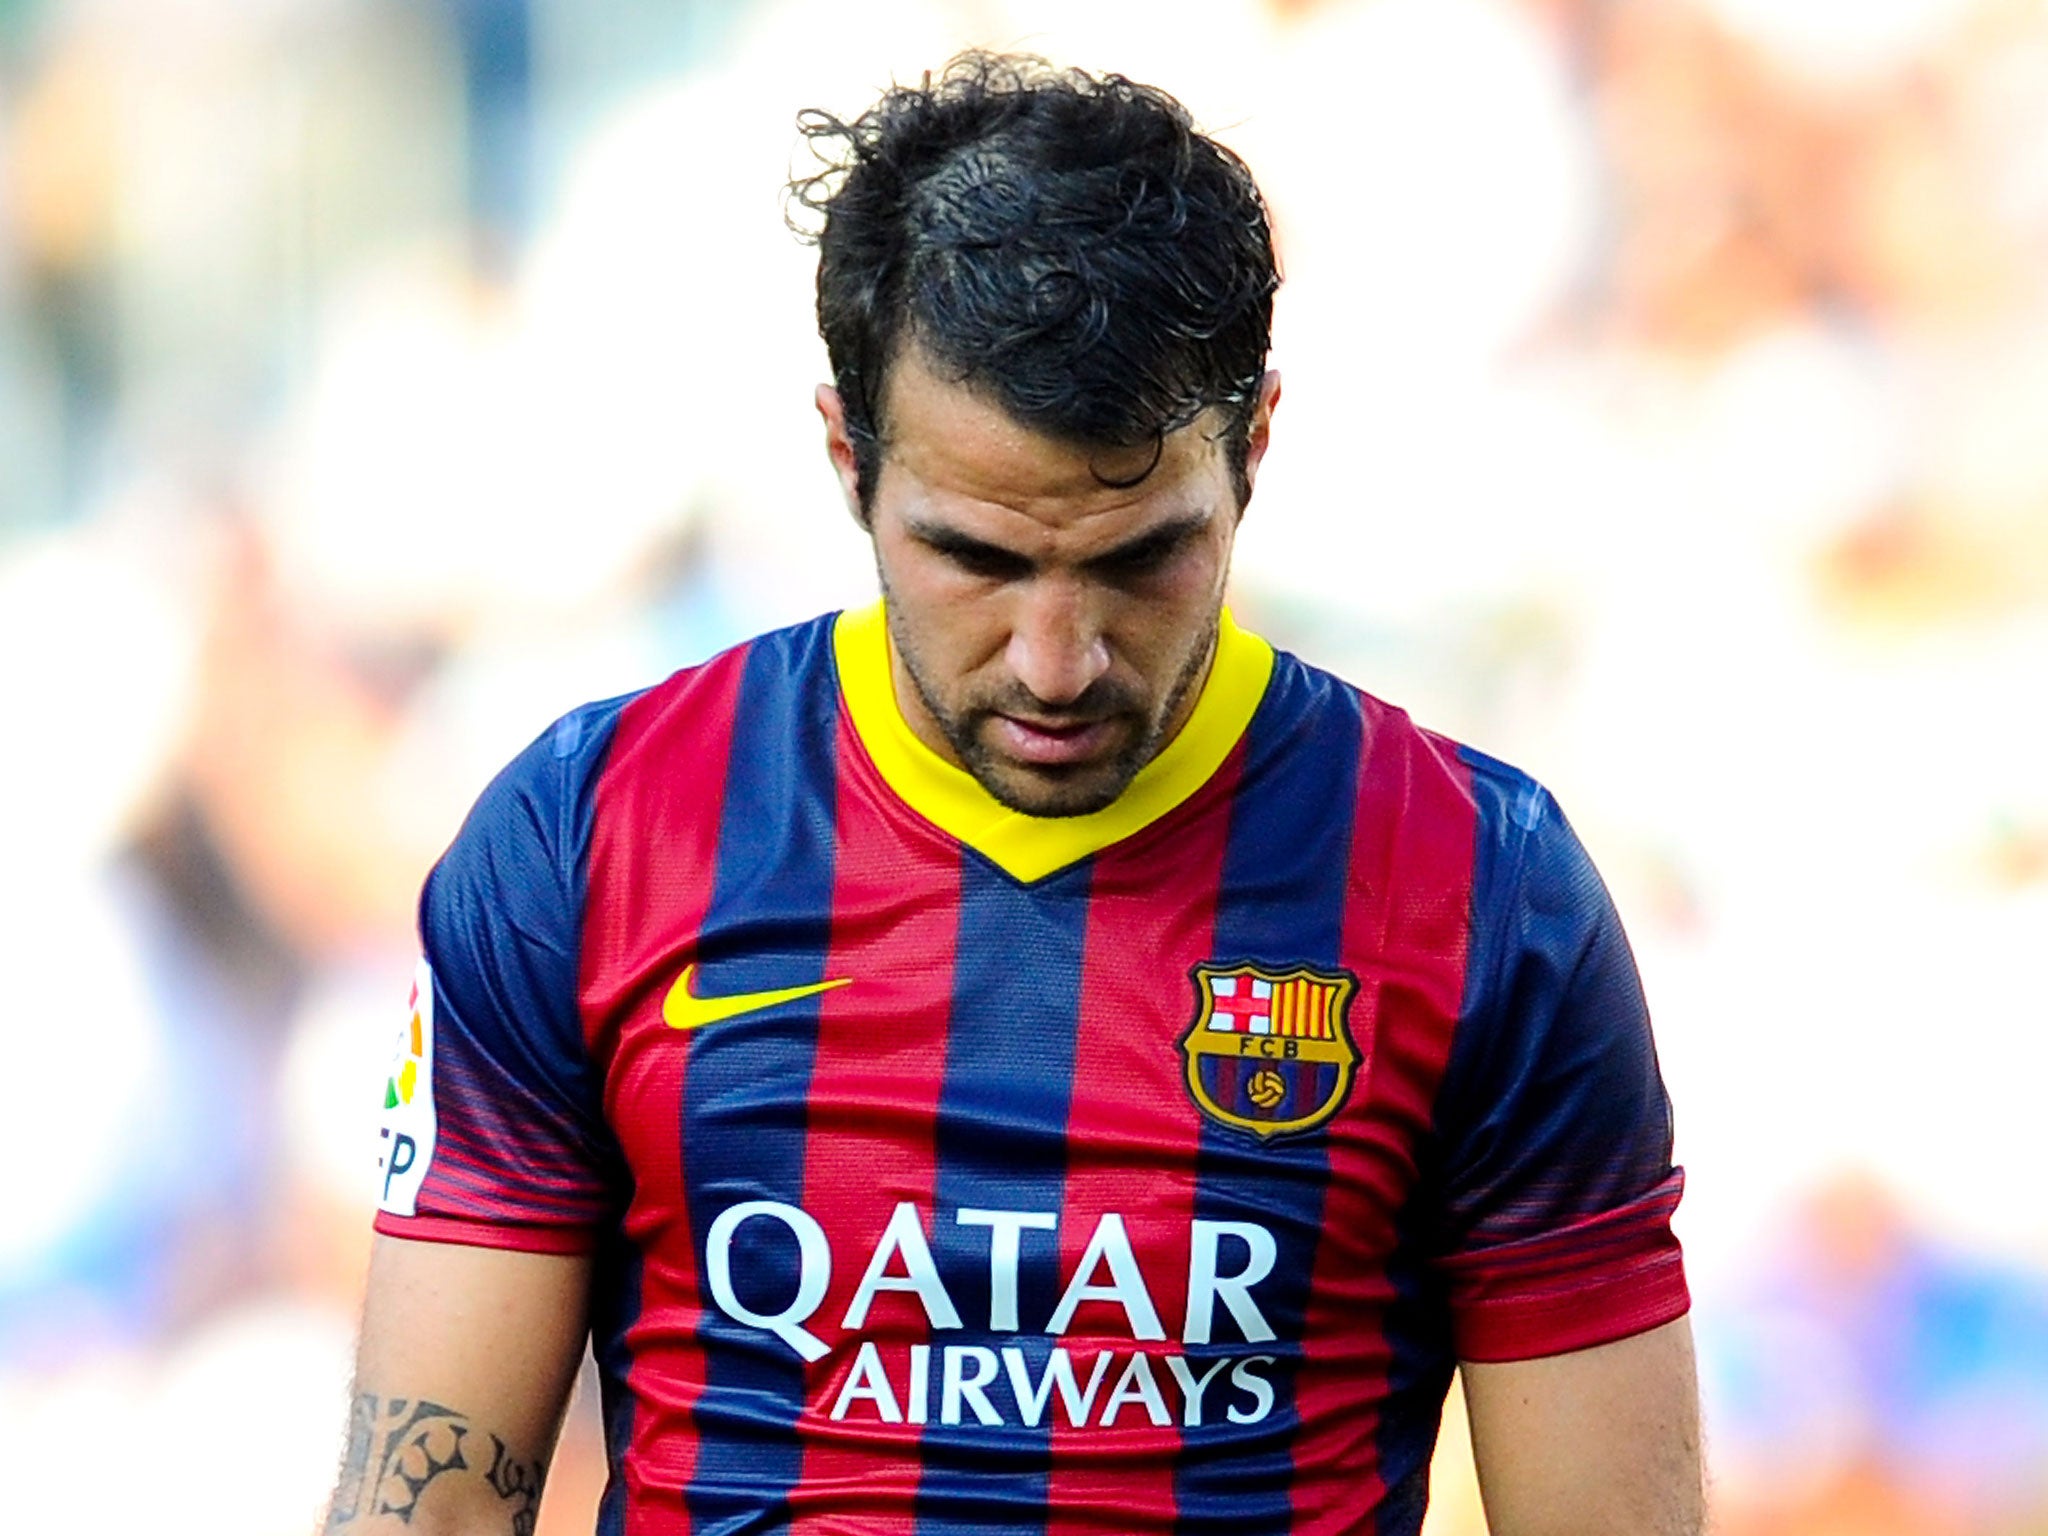 Cesc Fabregas is in the middle of a row with Barcelona over unpaid money, according to reports